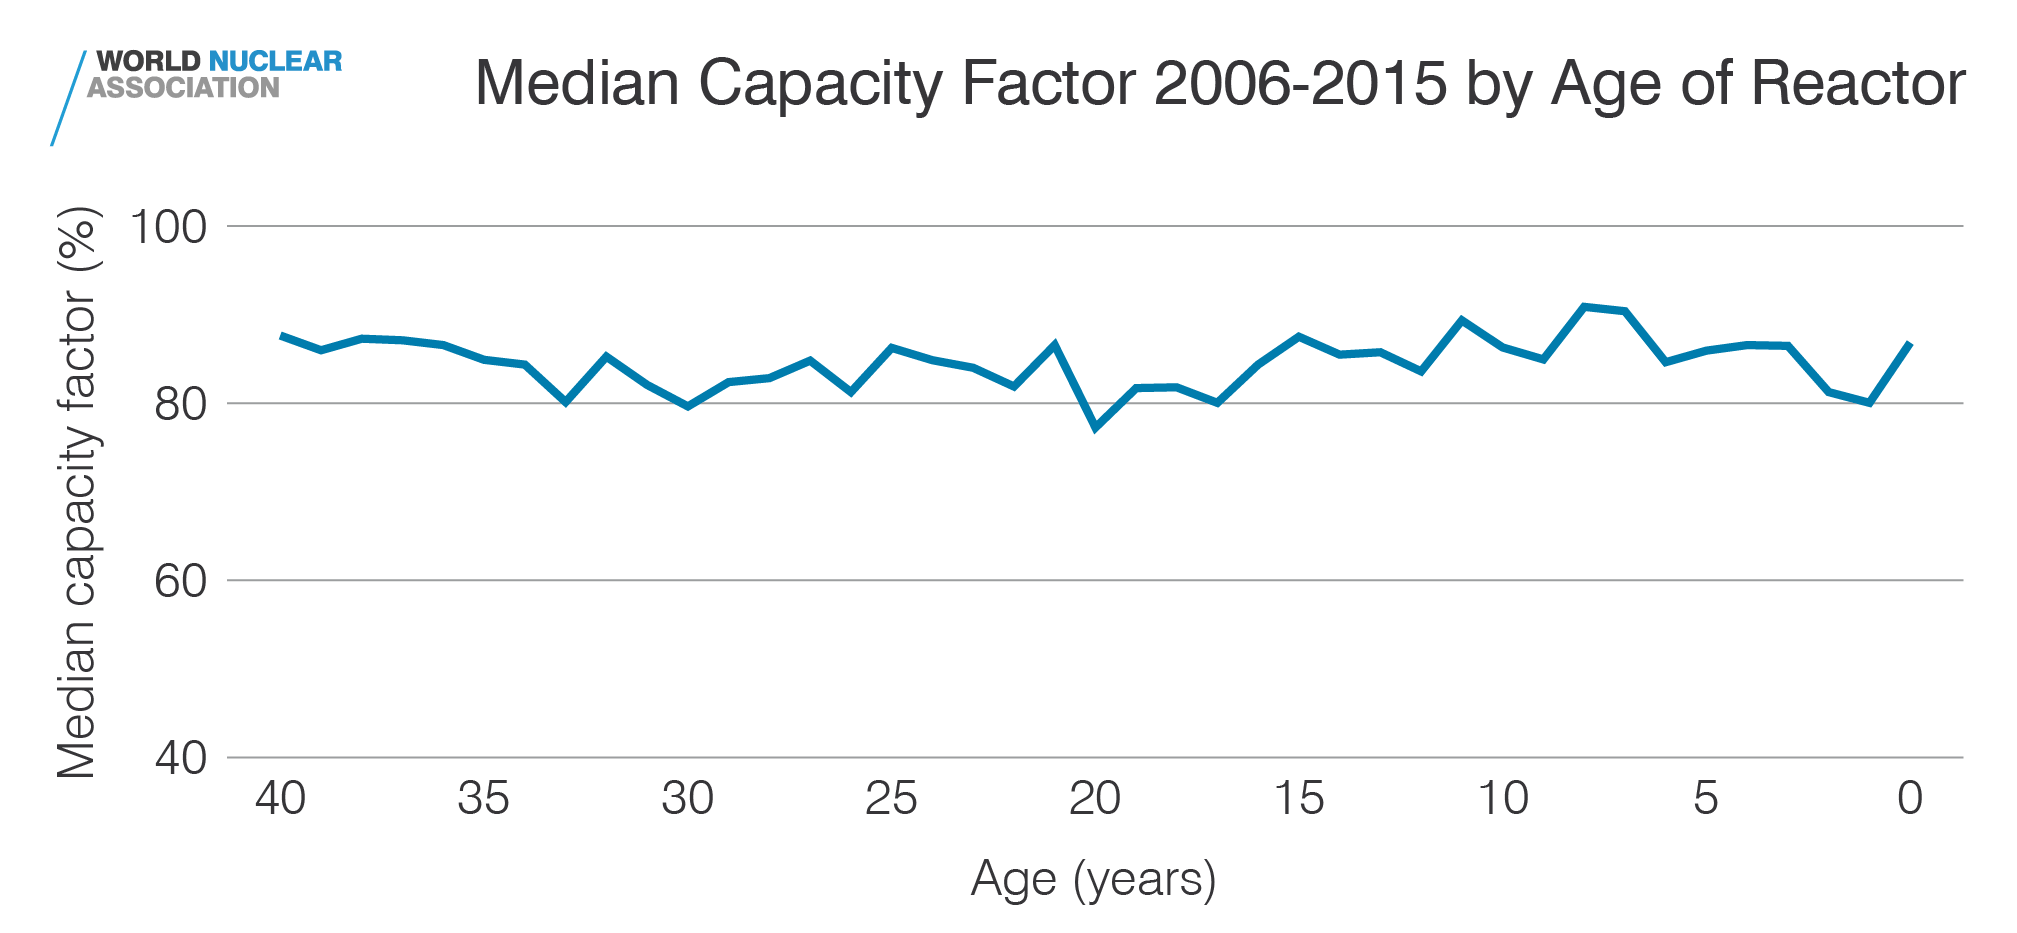 Median capacity factor 2006-2015 by age of reactor